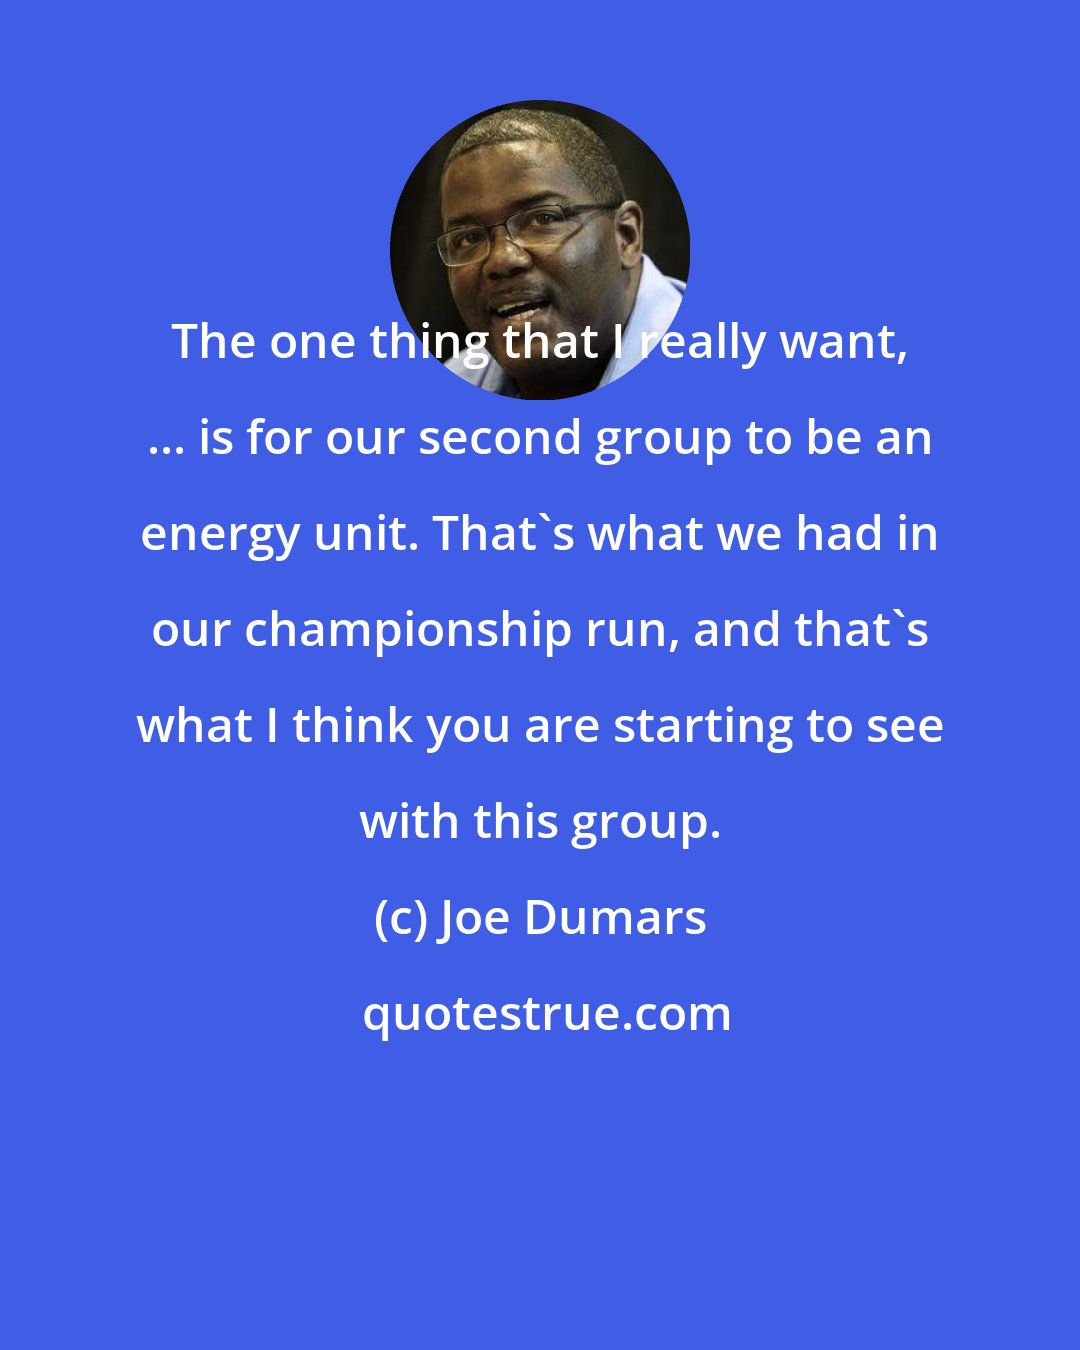 Joe Dumars: The one thing that I really want, ... is for our second group to be an energy unit. That's what we had in our championship run, and that's what I think you are starting to see with this group.